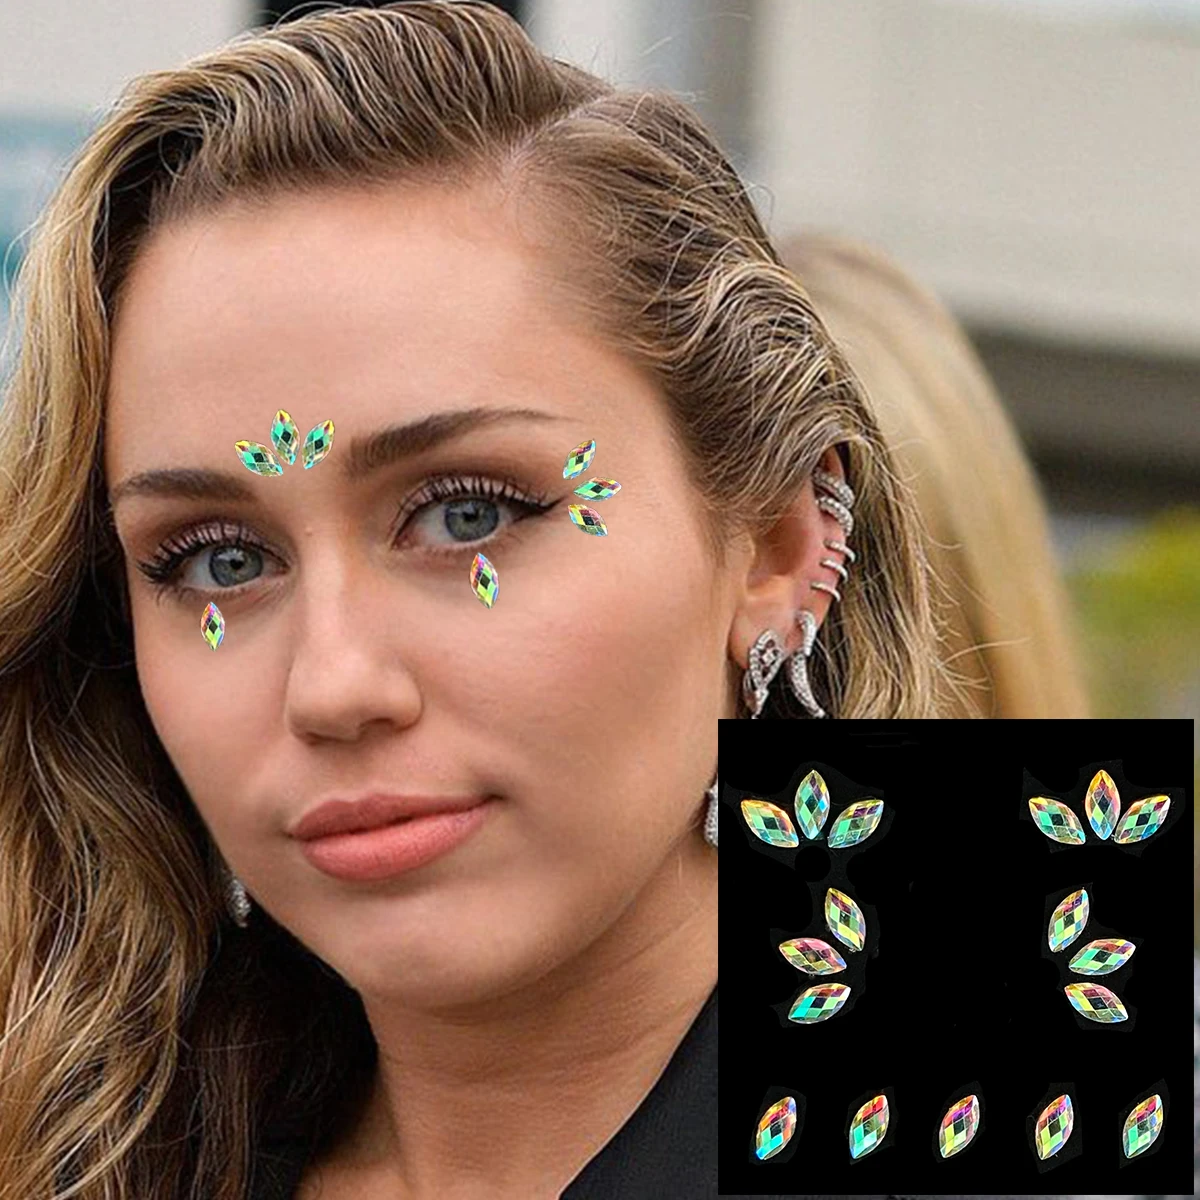 Face Red Water Drop Gems Temporary Tattoos Eye Eyebrow Rhinestones Tears Jewels Makeup Sticker Shiny Dots Jewelry Nail Art Party